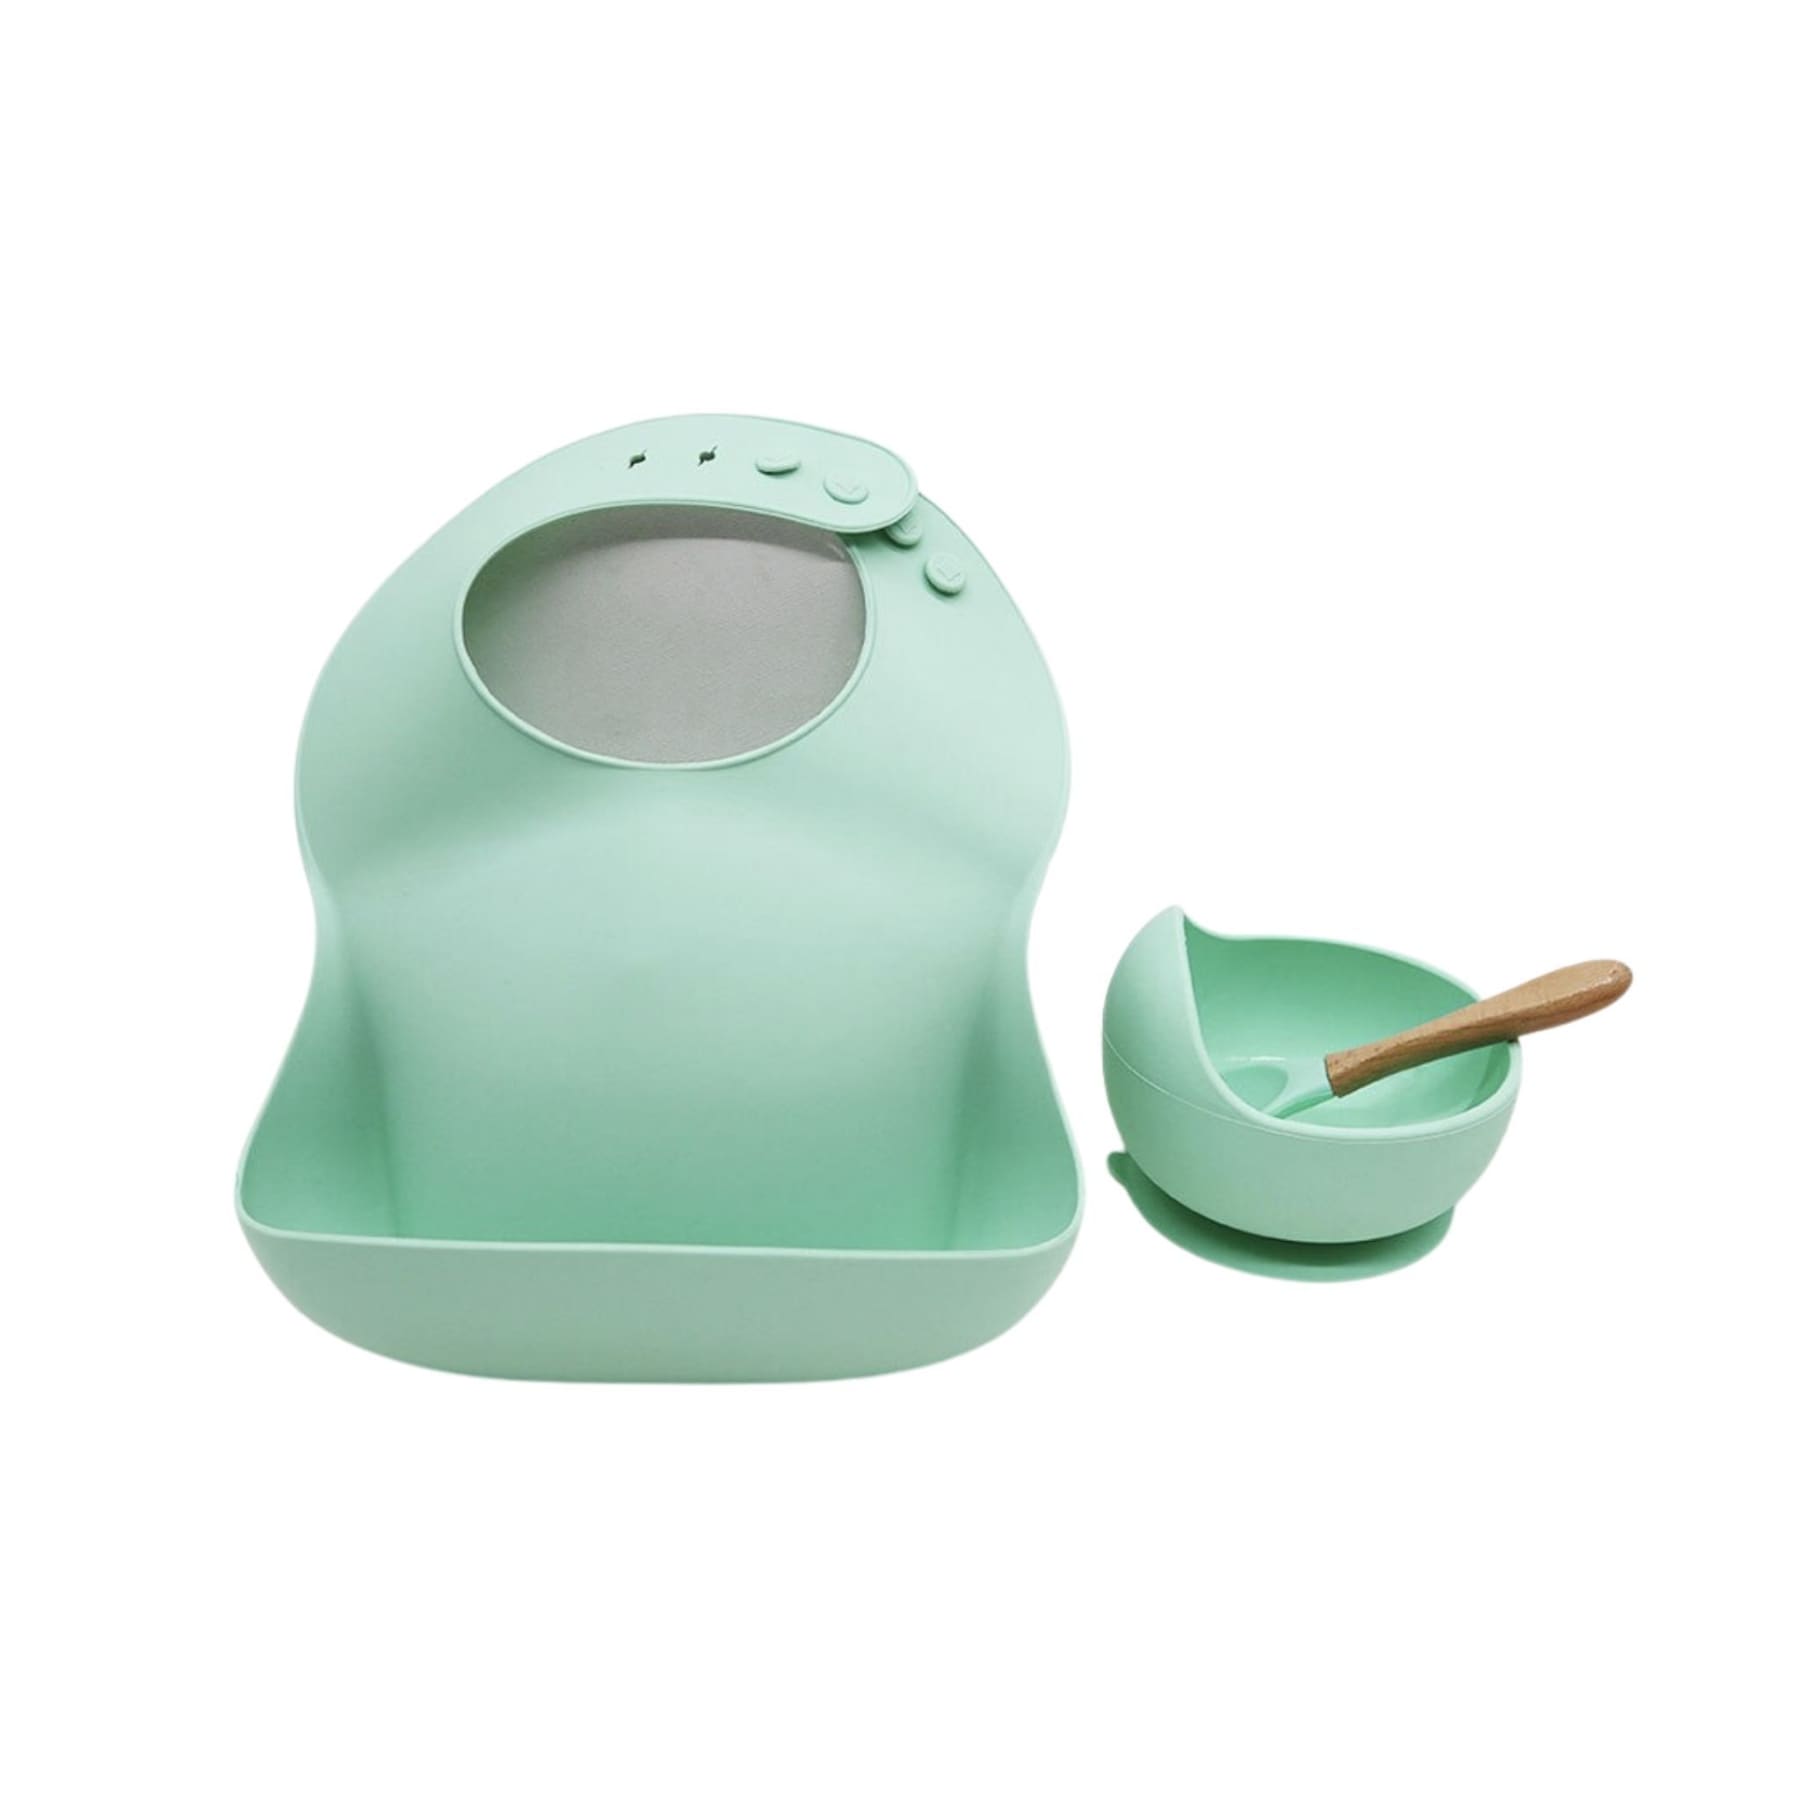 Tableware Set- Silicone Bib and Suction Bowl with Spoon - 